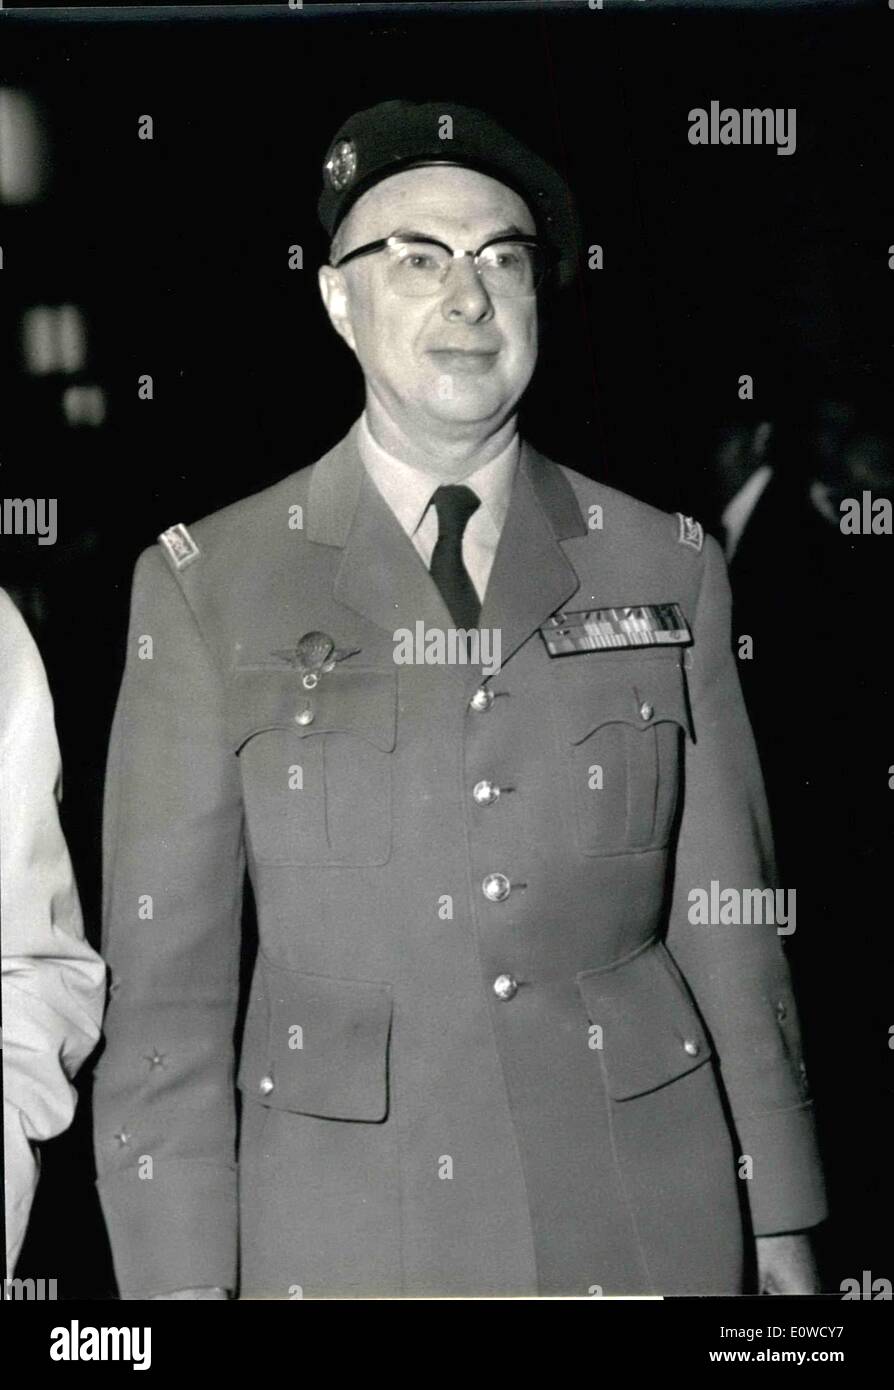 May 16, 1962 - The former commander and chief of the French army in Algeria, General Ailleret arrived in uniform of the parachutists at the Palace of Justice in Paris for the trial of ex-general Raoul Salan. Stock Photo